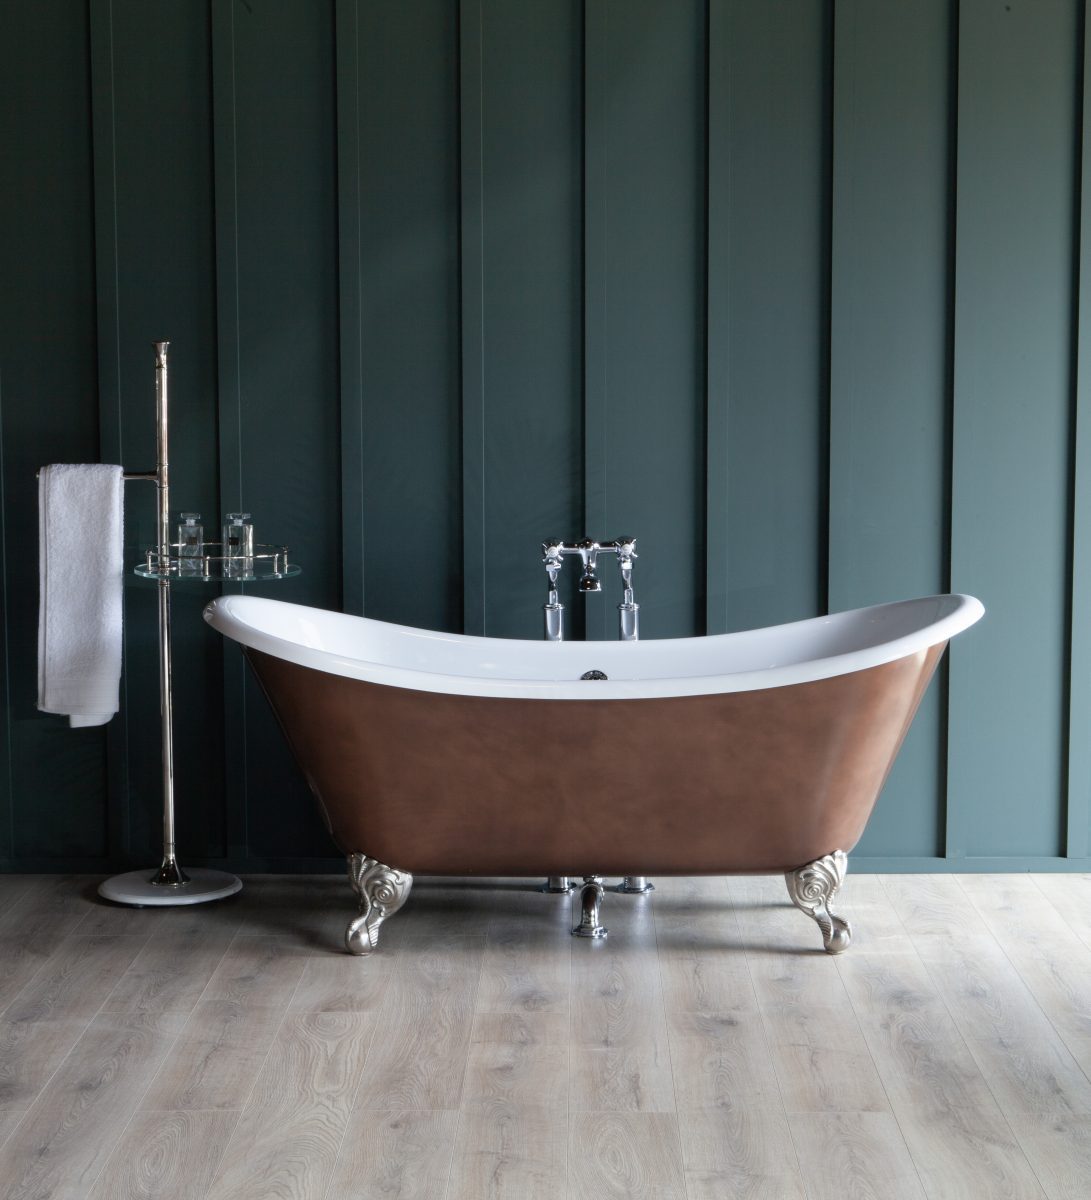 Imperium Double Ended Bath with burnished Bronze exterior and nickel plated feet. Hand made to order at our factory in Essex and available in three lengths - 1645mm, 1765mm and 1810mm. Choose from a vast range of colours mixed in a high technology polyurethane paint. This gives a washable and durable coating for the busy bathroom. Also available are our in-house hand applied metallic burnished effect finishes of Gold, Bronze or Iron effect.